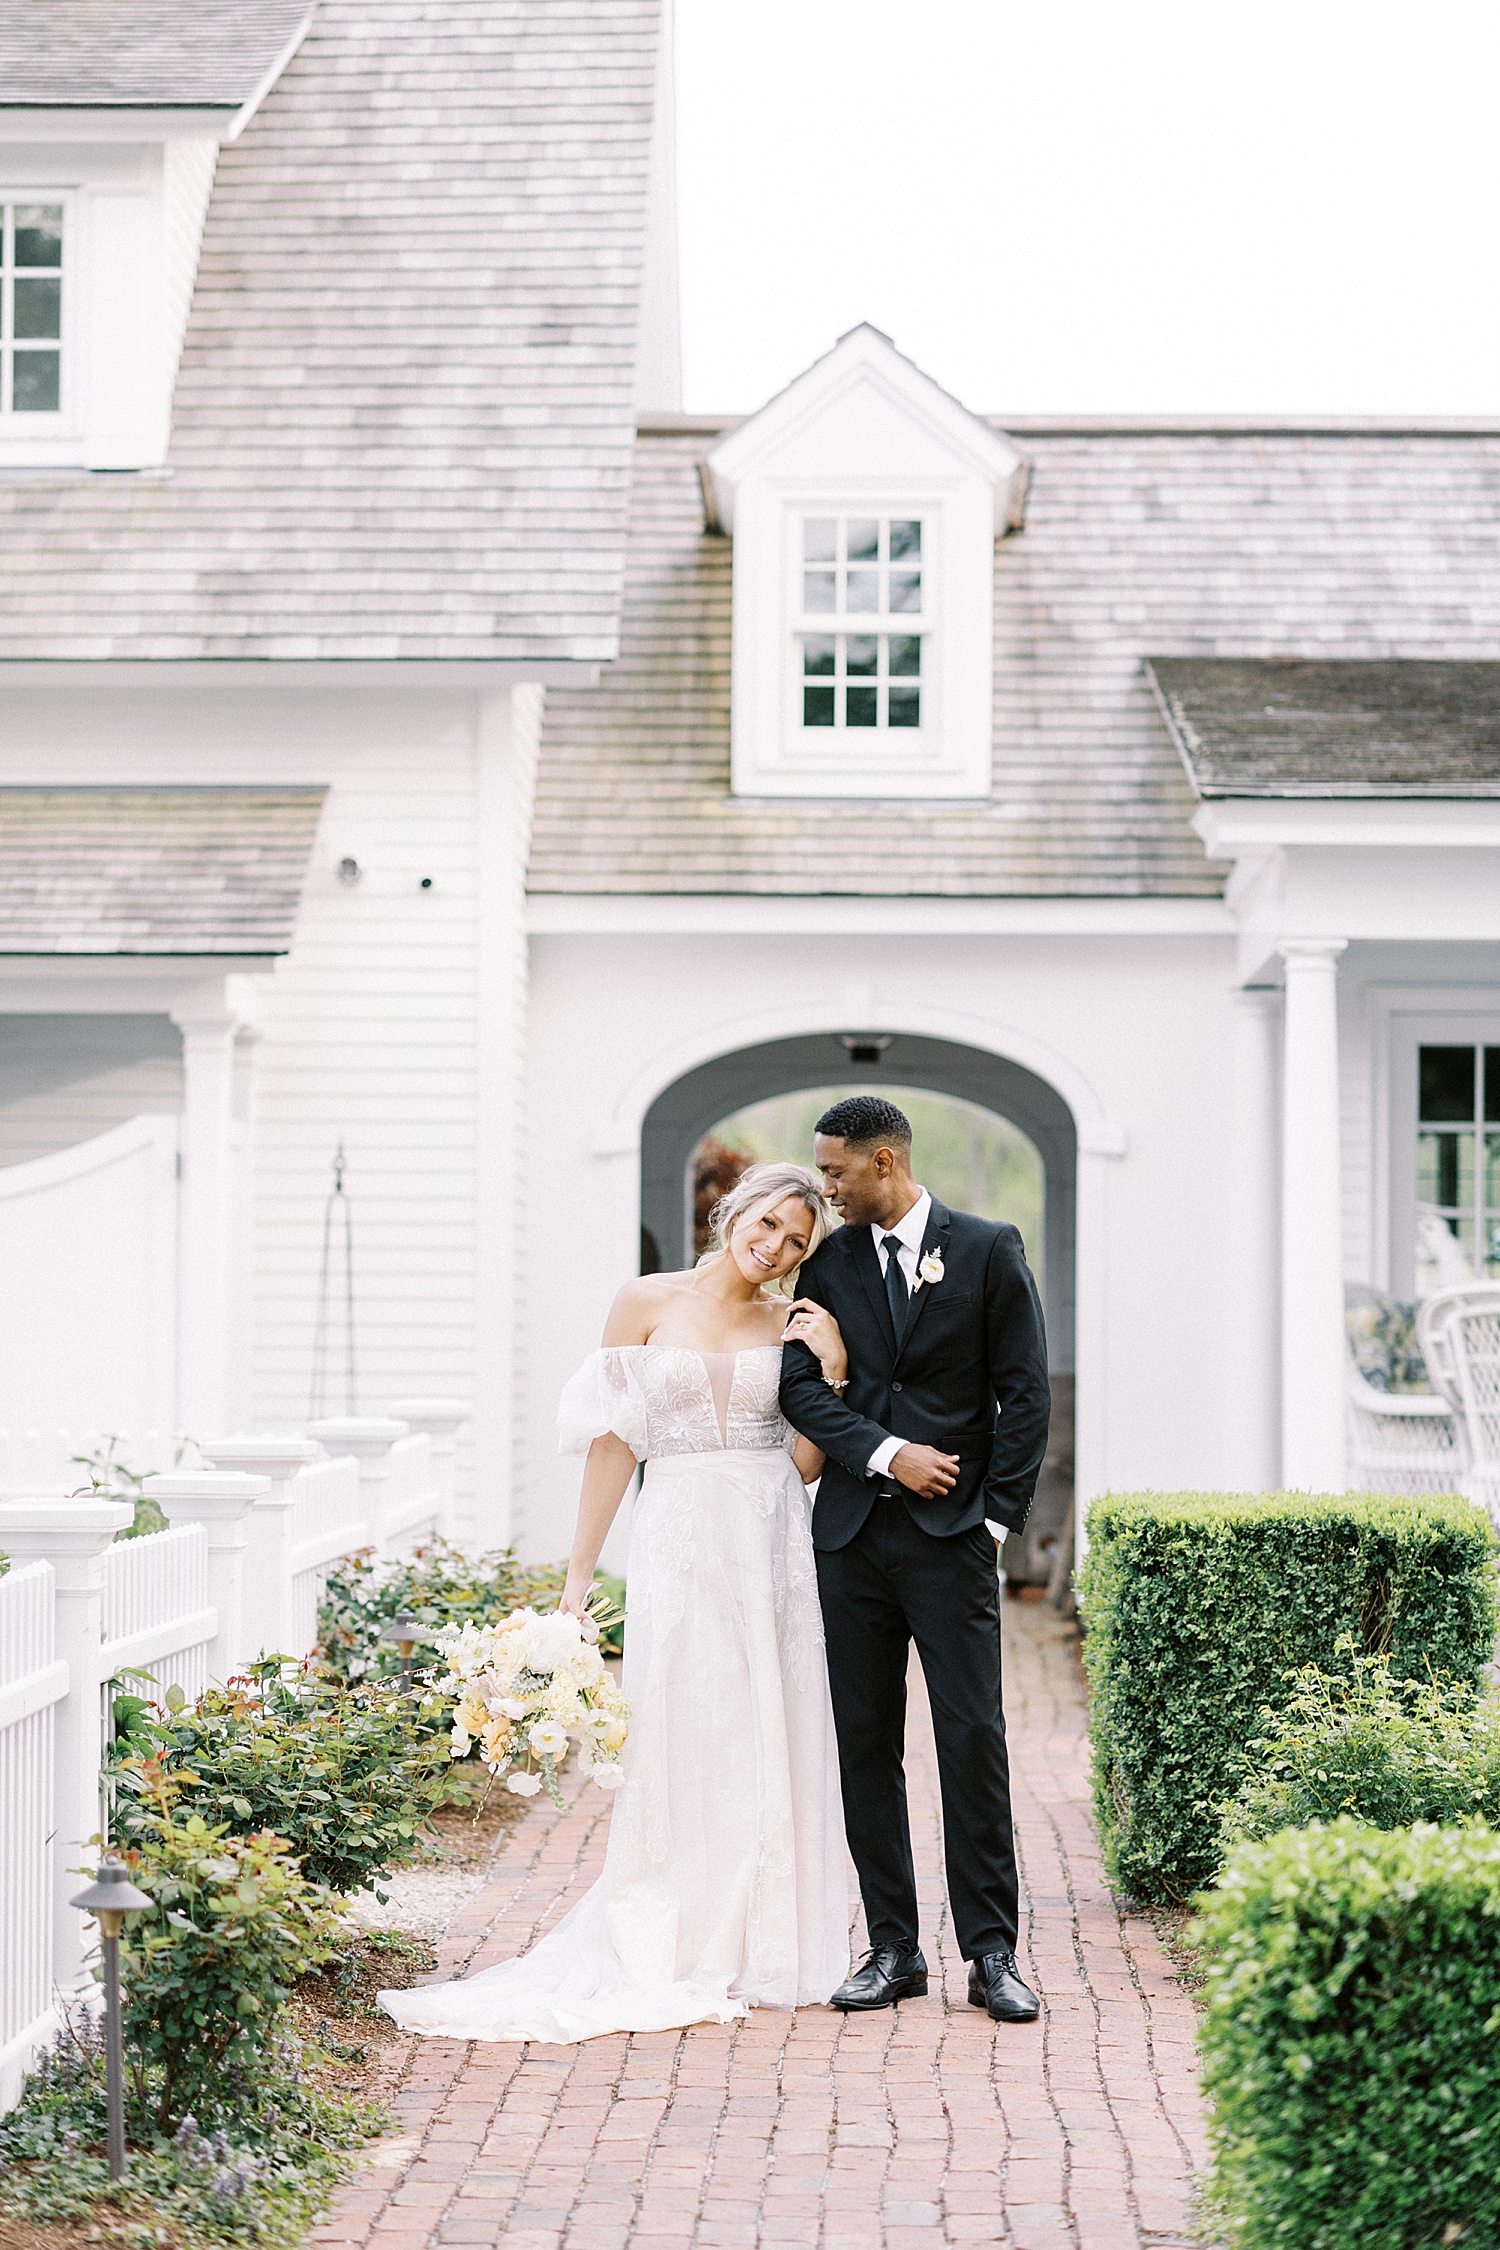 Bride and groom near cottage by Lynne Reznick Photography